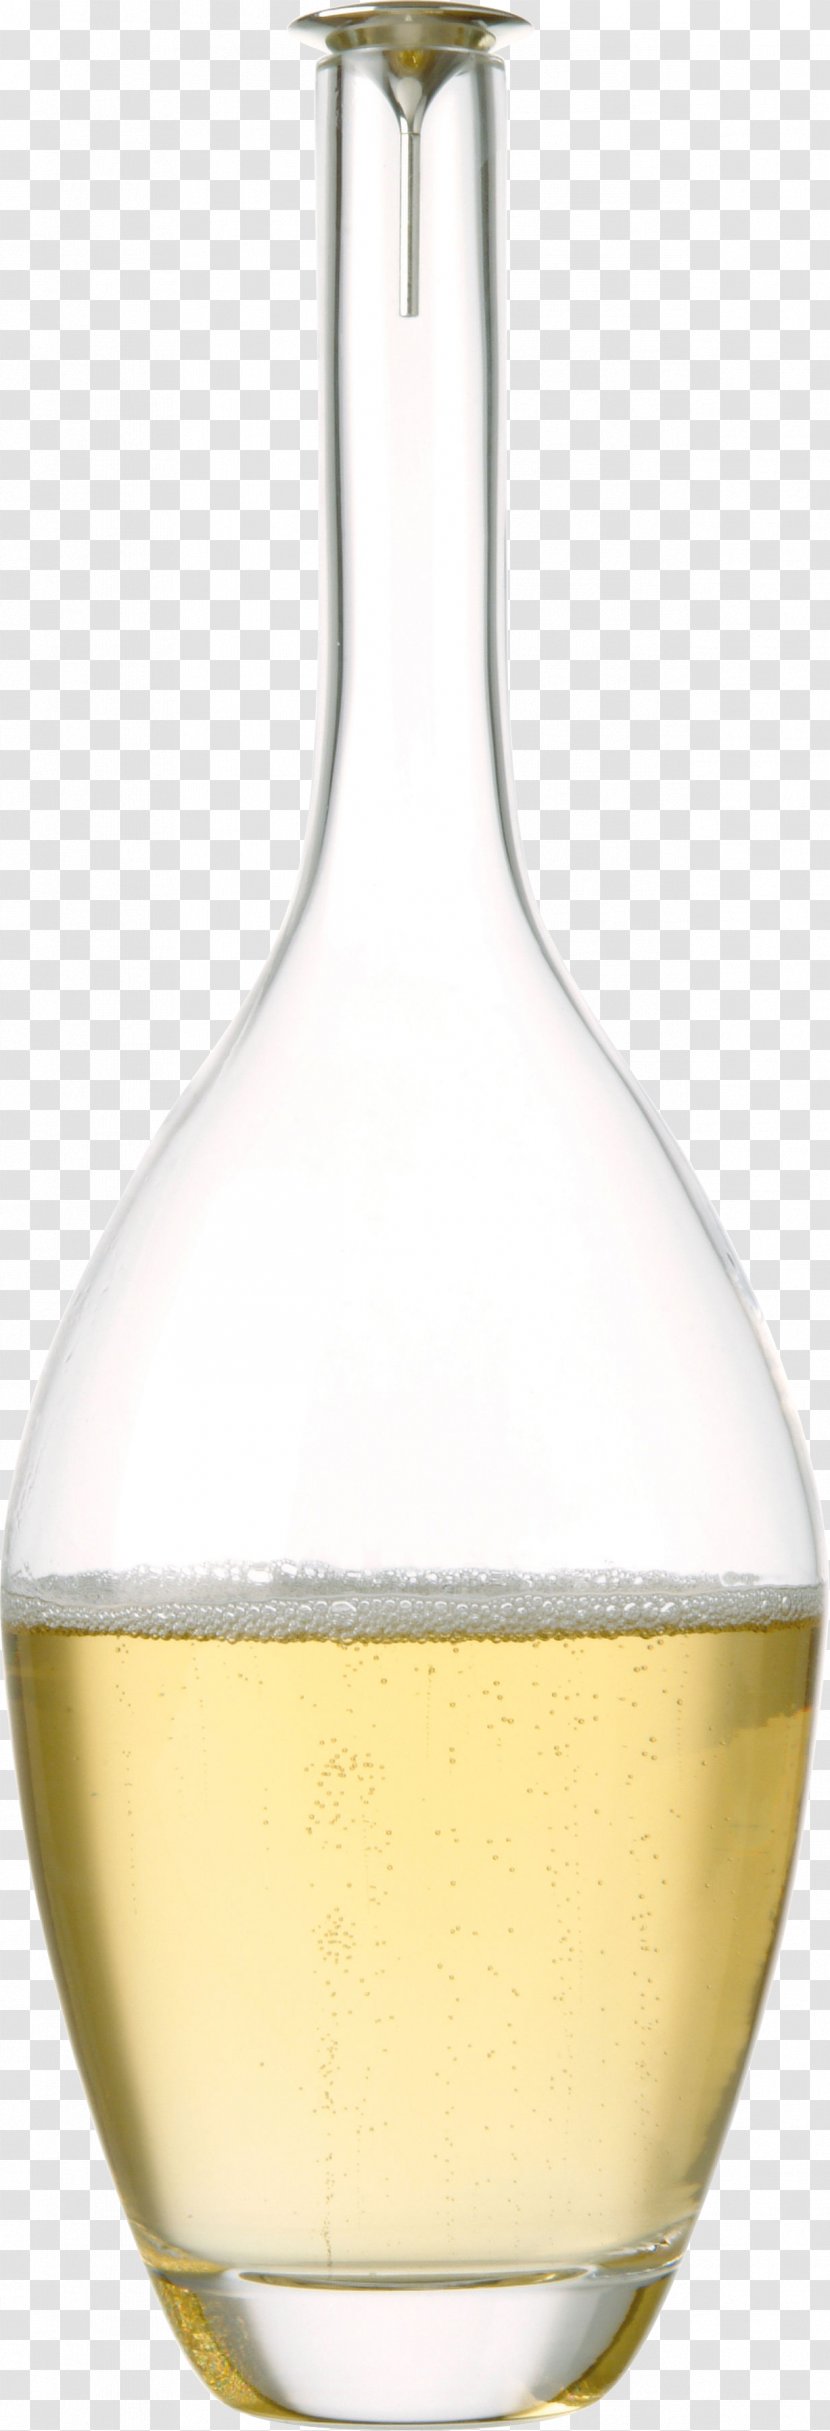 Wine Carafe Decanter Champagne Bung - Glass - Stopper Transparent PNG